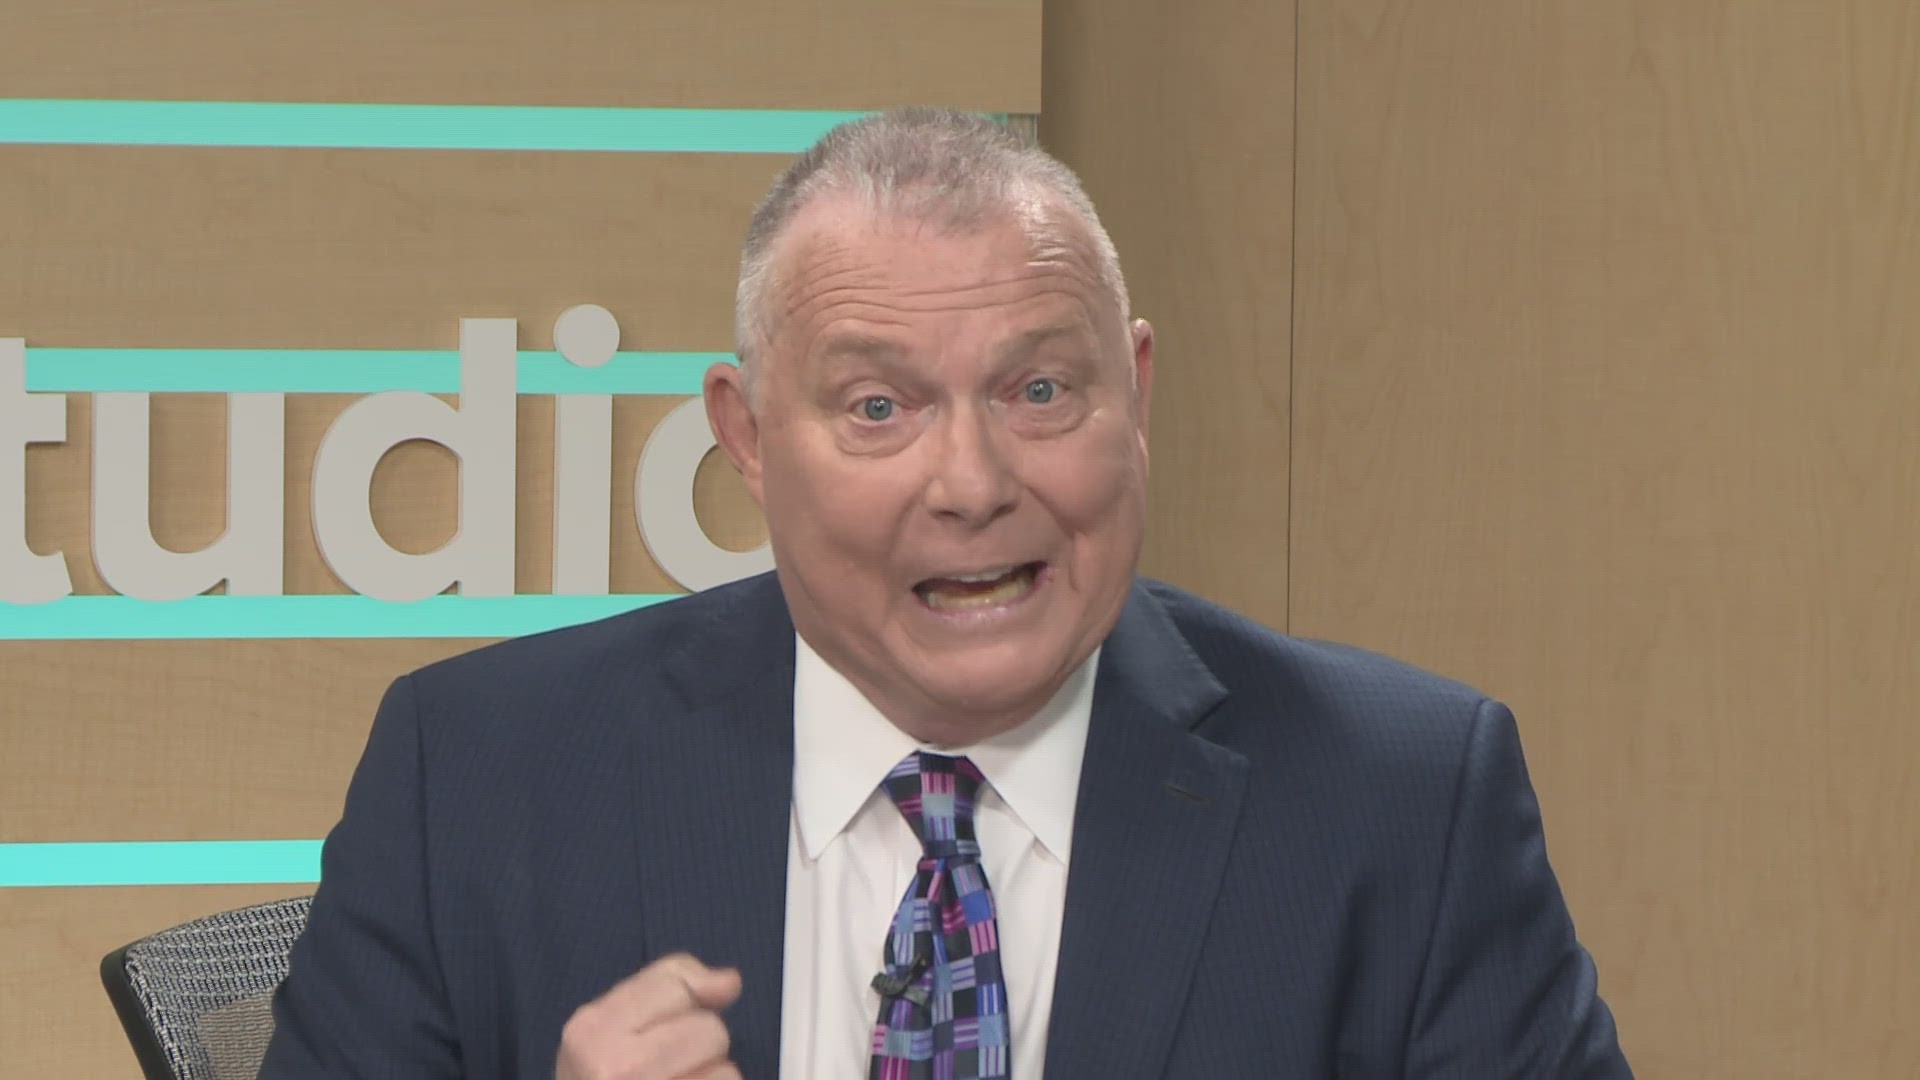 Jim Donovan shares a health update with viewers on Wednesday's edition of Front Row.